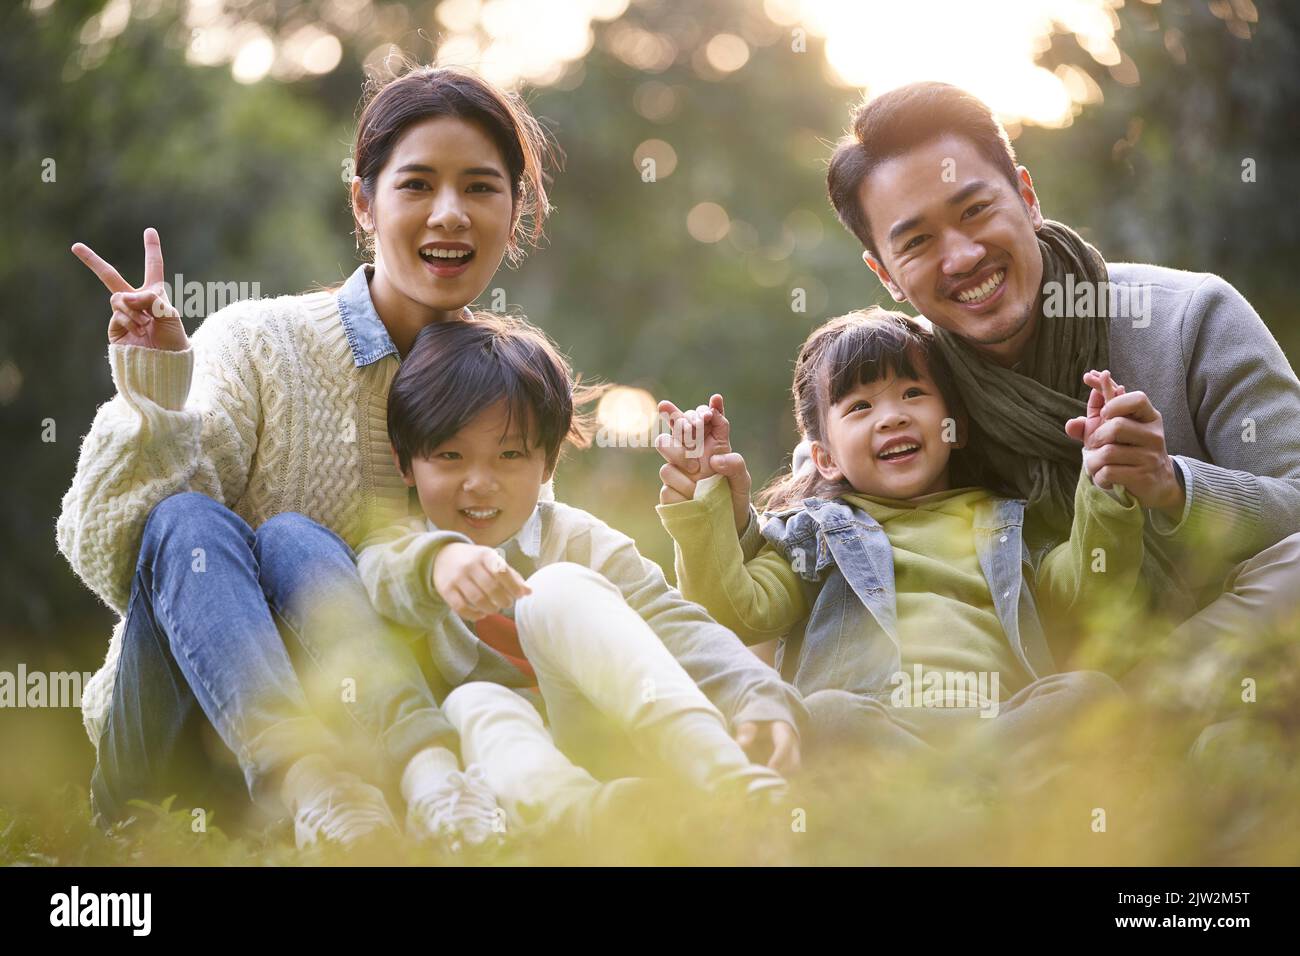 outdoor portrait of a happy young asian family with two children sitting on grass in park Stock Photo